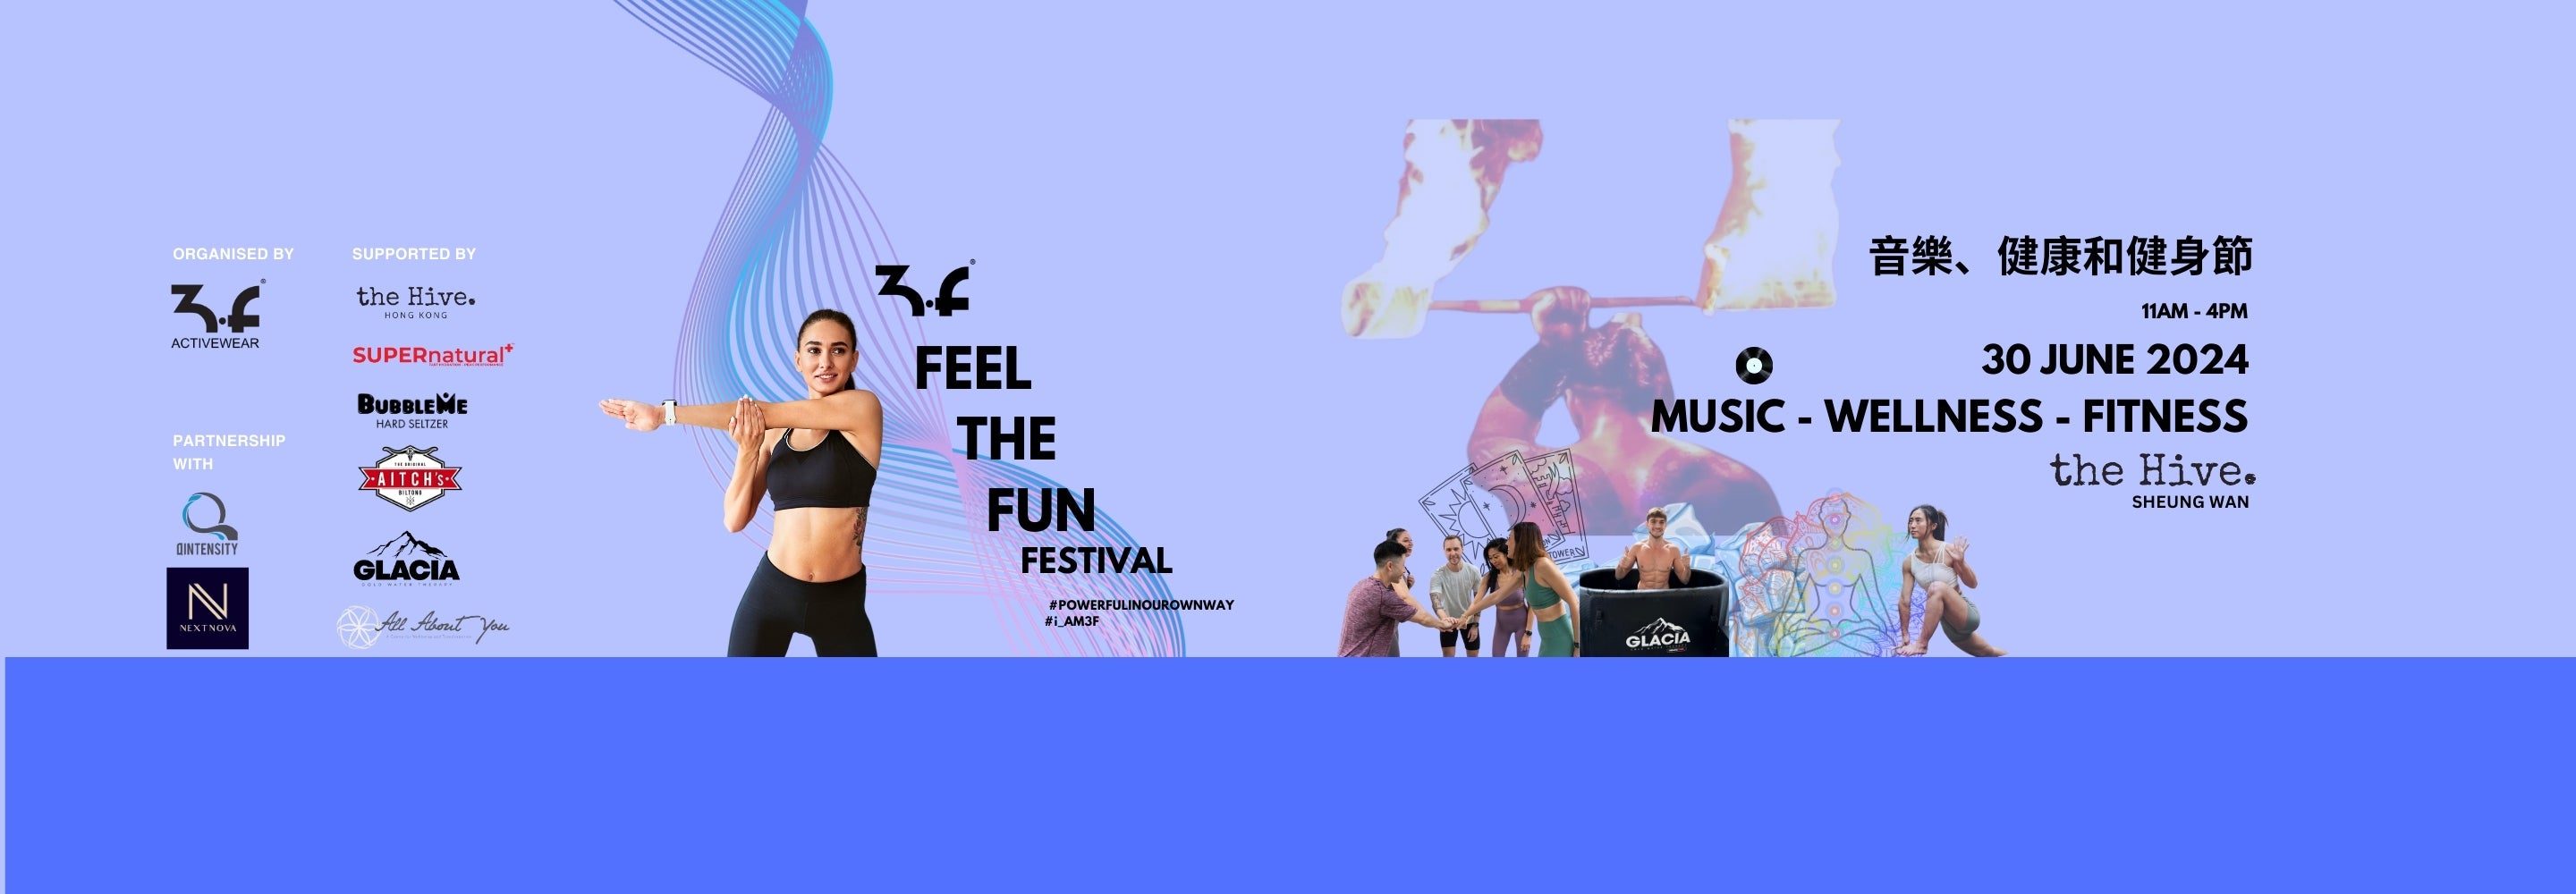 3F Feel the Fun Festival with music, different workshops and activities. 30 June 2024 The Hive Sheung wan Hong Kong